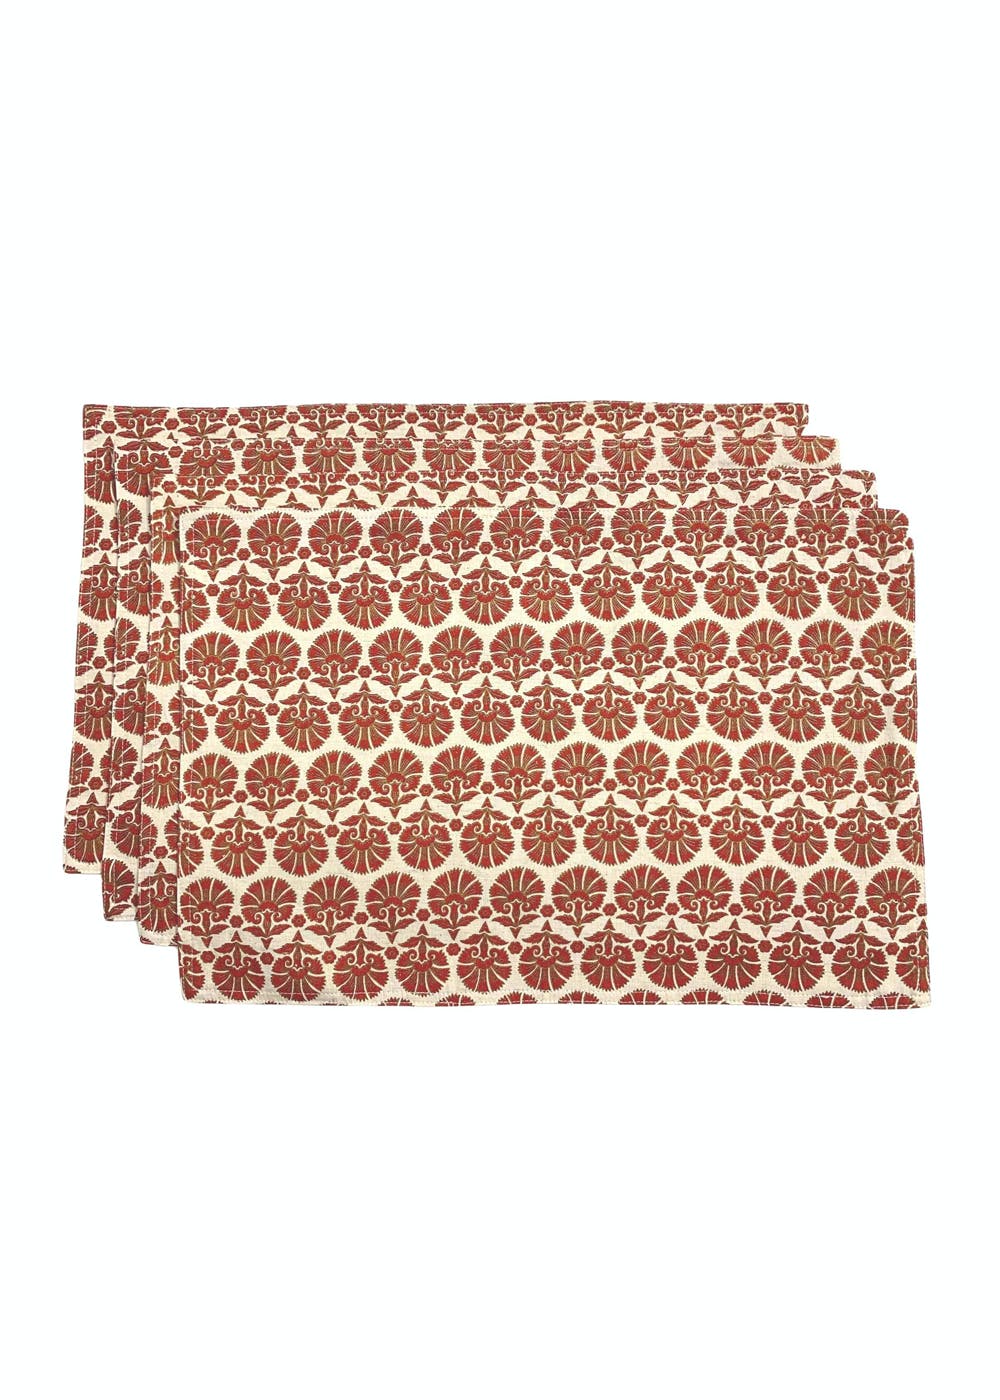 Red Cotton Flax Printed Table Mats - Set Of 4